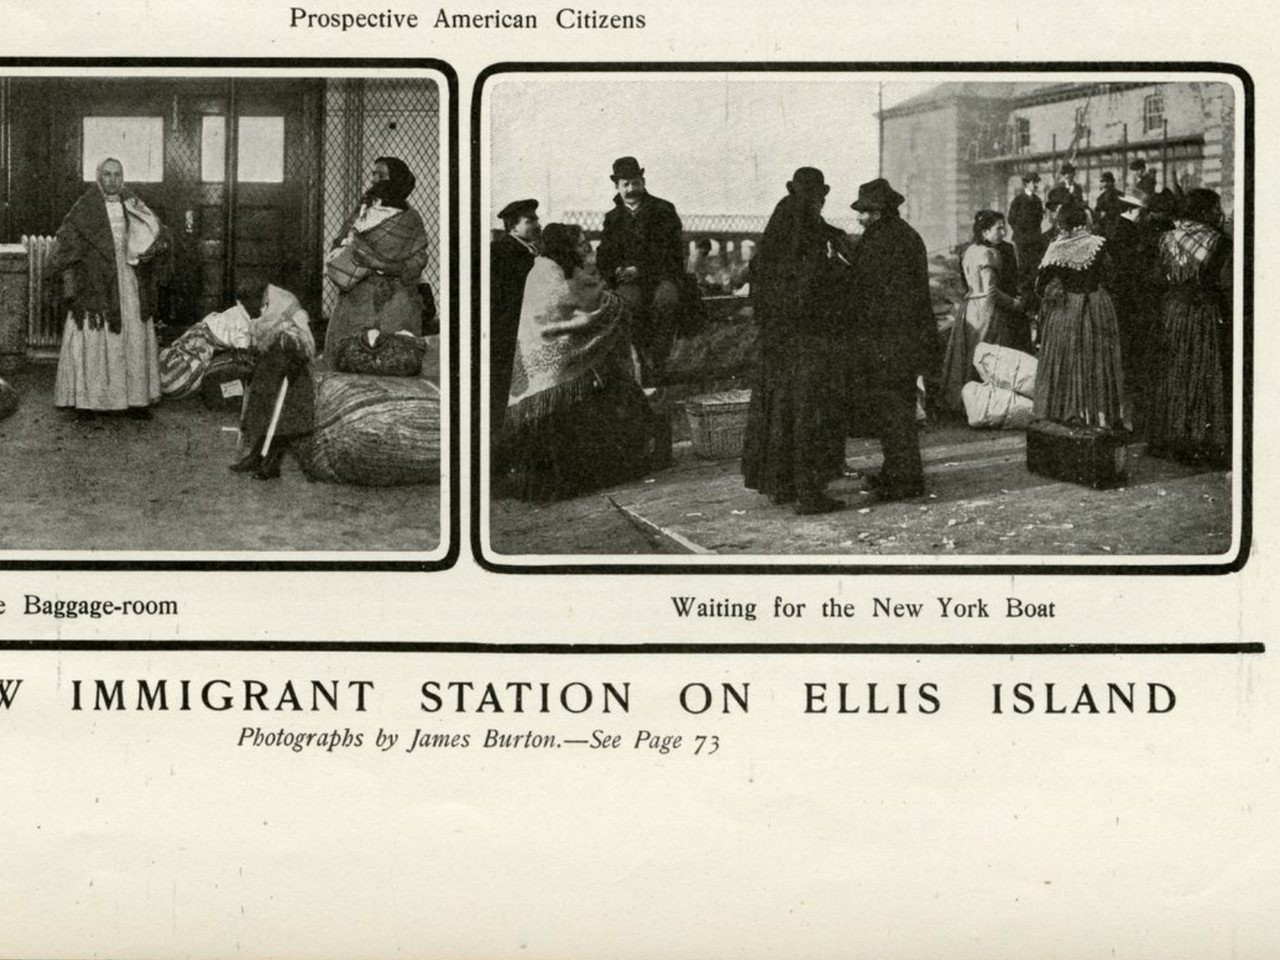 Photographs in Harpers Weekly showing scenes from Ellis island